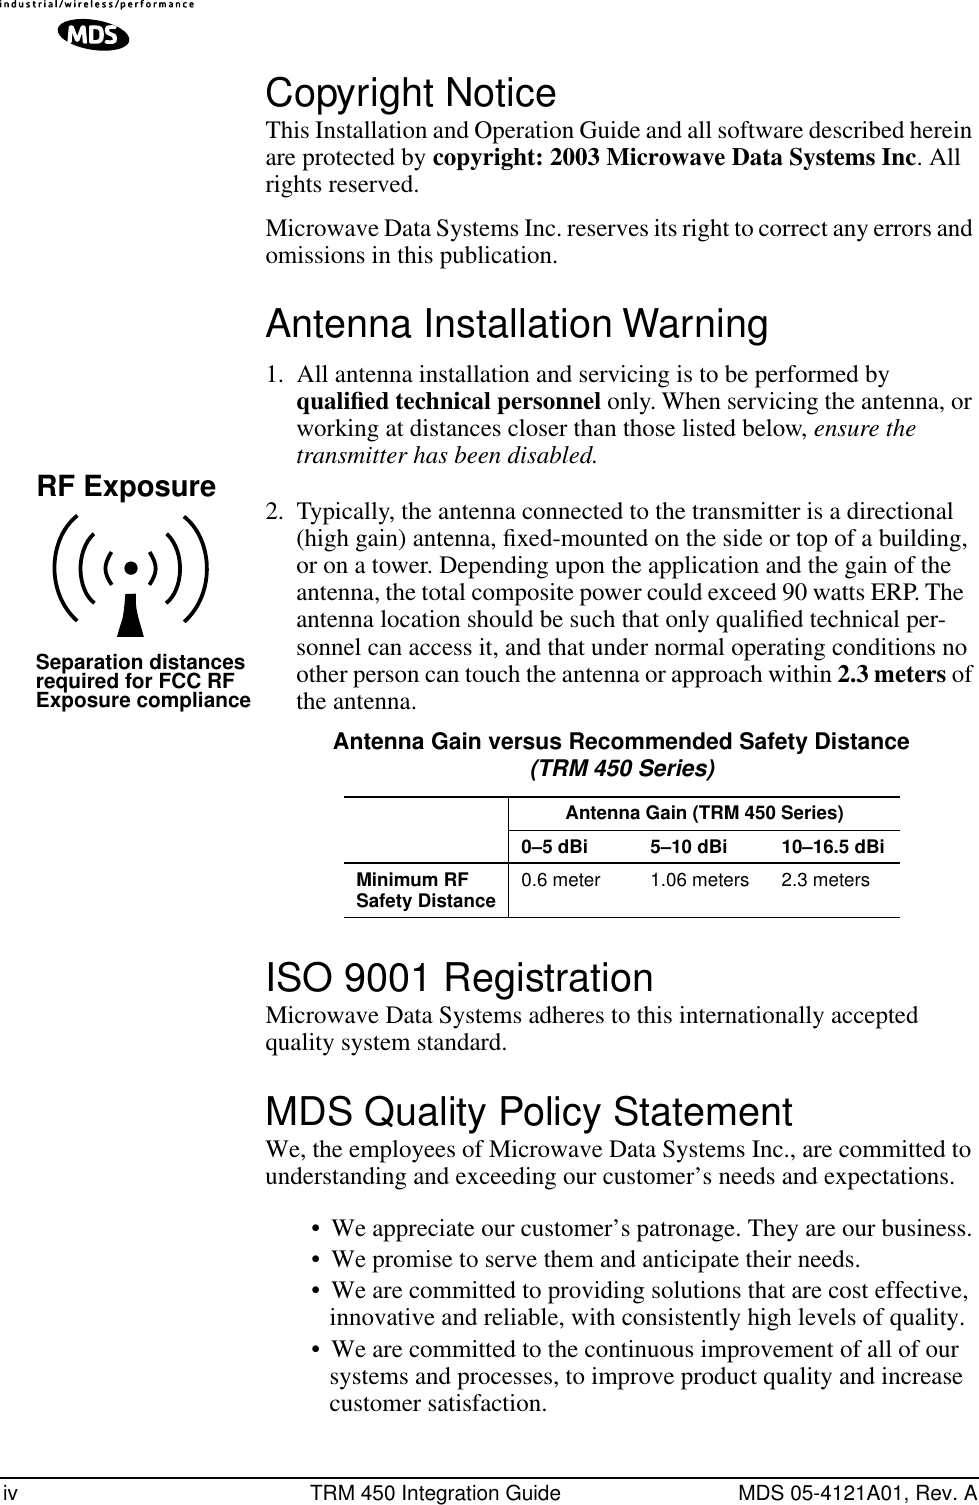  iv TRM 450 Integration Guide MDS 05-4121A01, Rev. A Copyright Notice This Installation and Operation Guide and all software described herein are protected by  copyright: 2003 Microwave Data Systems Inc . All rights reserved.Microwave Data Systems Inc. reserves its right to correct any errors and omissions in this publication. Antenna Installation Warning 1. All antenna installation and servicing is to be performed by  qualiﬁed technical personnel  only. When servicing the antenna, or working at distances closer than those listed below,  ensure the transmitter has been disabled. 2. Typically, the antenna connected to the transmitter is a directional (high gain) antenna, ﬁxed-mounted on the side or top of a building, or on a tower. Depending upon the application and the gain of the antenna, the total composite power could exceed 90 watts ERP. The antenna location should be such that only qualiﬁed technical per-sonnel can access it, and that under normal operating conditions no other person can touch the antenna or approach within  2.3 meters  of the antenna.  ISO 9001 Registration Microwave Data Systems adheres to this internationally accepted quality system standard. MDS Quality Policy Statement We, the employees of Microwave Data Systems Inc., are committed to understanding and exceeding our customer’s needs and expectations.• We appreciate our customer’s patronage. They are our business.• We promise to serve them and anticipate their needs.• We are committed to providing solutions that are cost effective, innovative and reliable, with consistently high levels of quality.• We are committed to the continuous improvement of all of our systems and processes, to improve product quality and increase customer satisfaction.RF ExposureSeparation distancesrequired for FCC RFExposure compliance Antenna Gain versus Recommended Safety Distance (TRM 450 Series) Antenna Gain (TRM 450 Series)0–5 dBi 5–10 dBi 10–16.5 dBiMinimum RF Safety Distance 0.6 meter 1.06 meters 2.3 meters